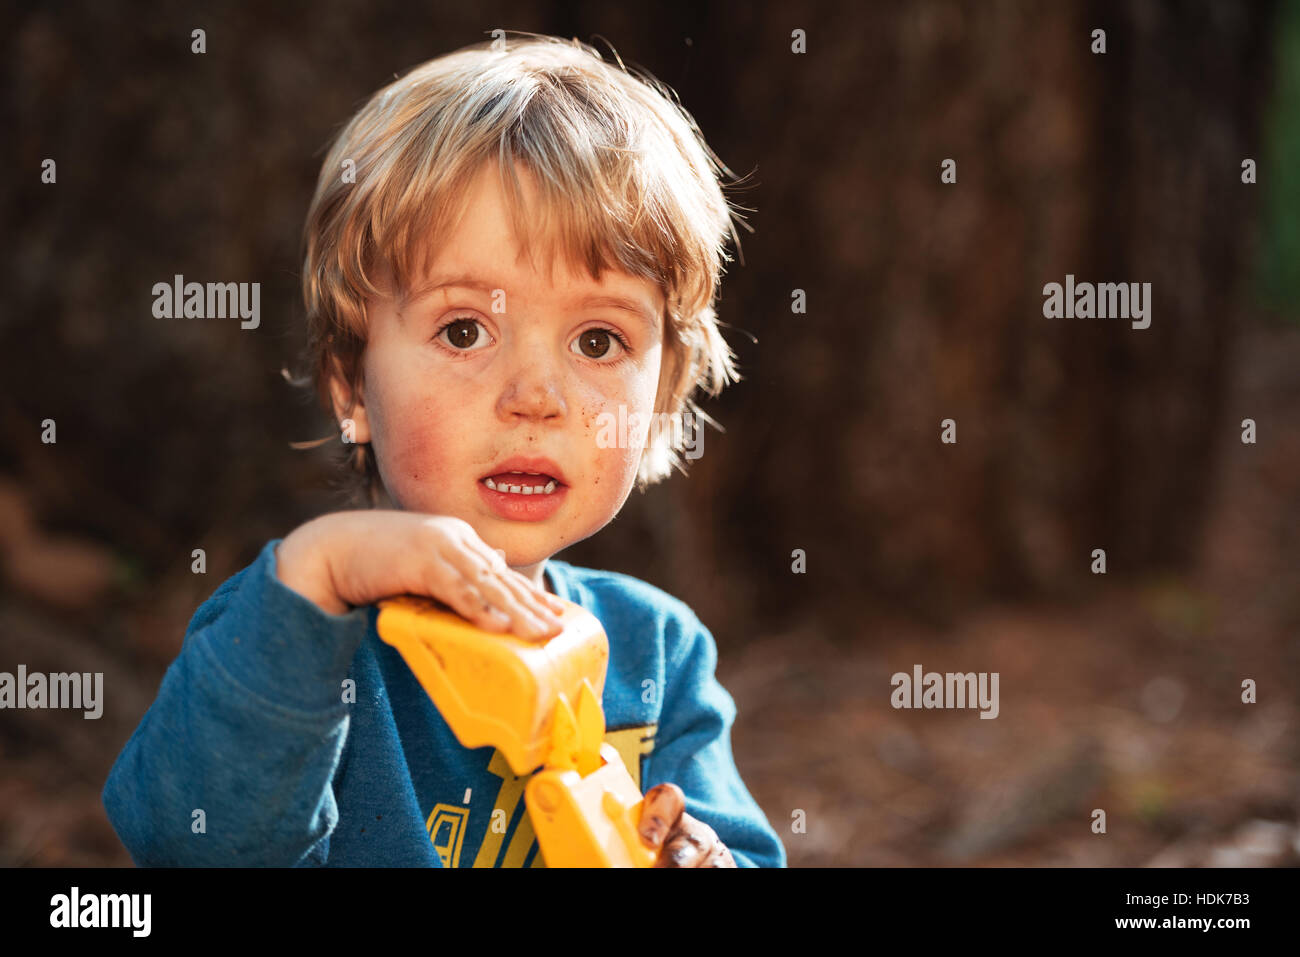 Surprised boy looking at camera. blur background Stock Photo